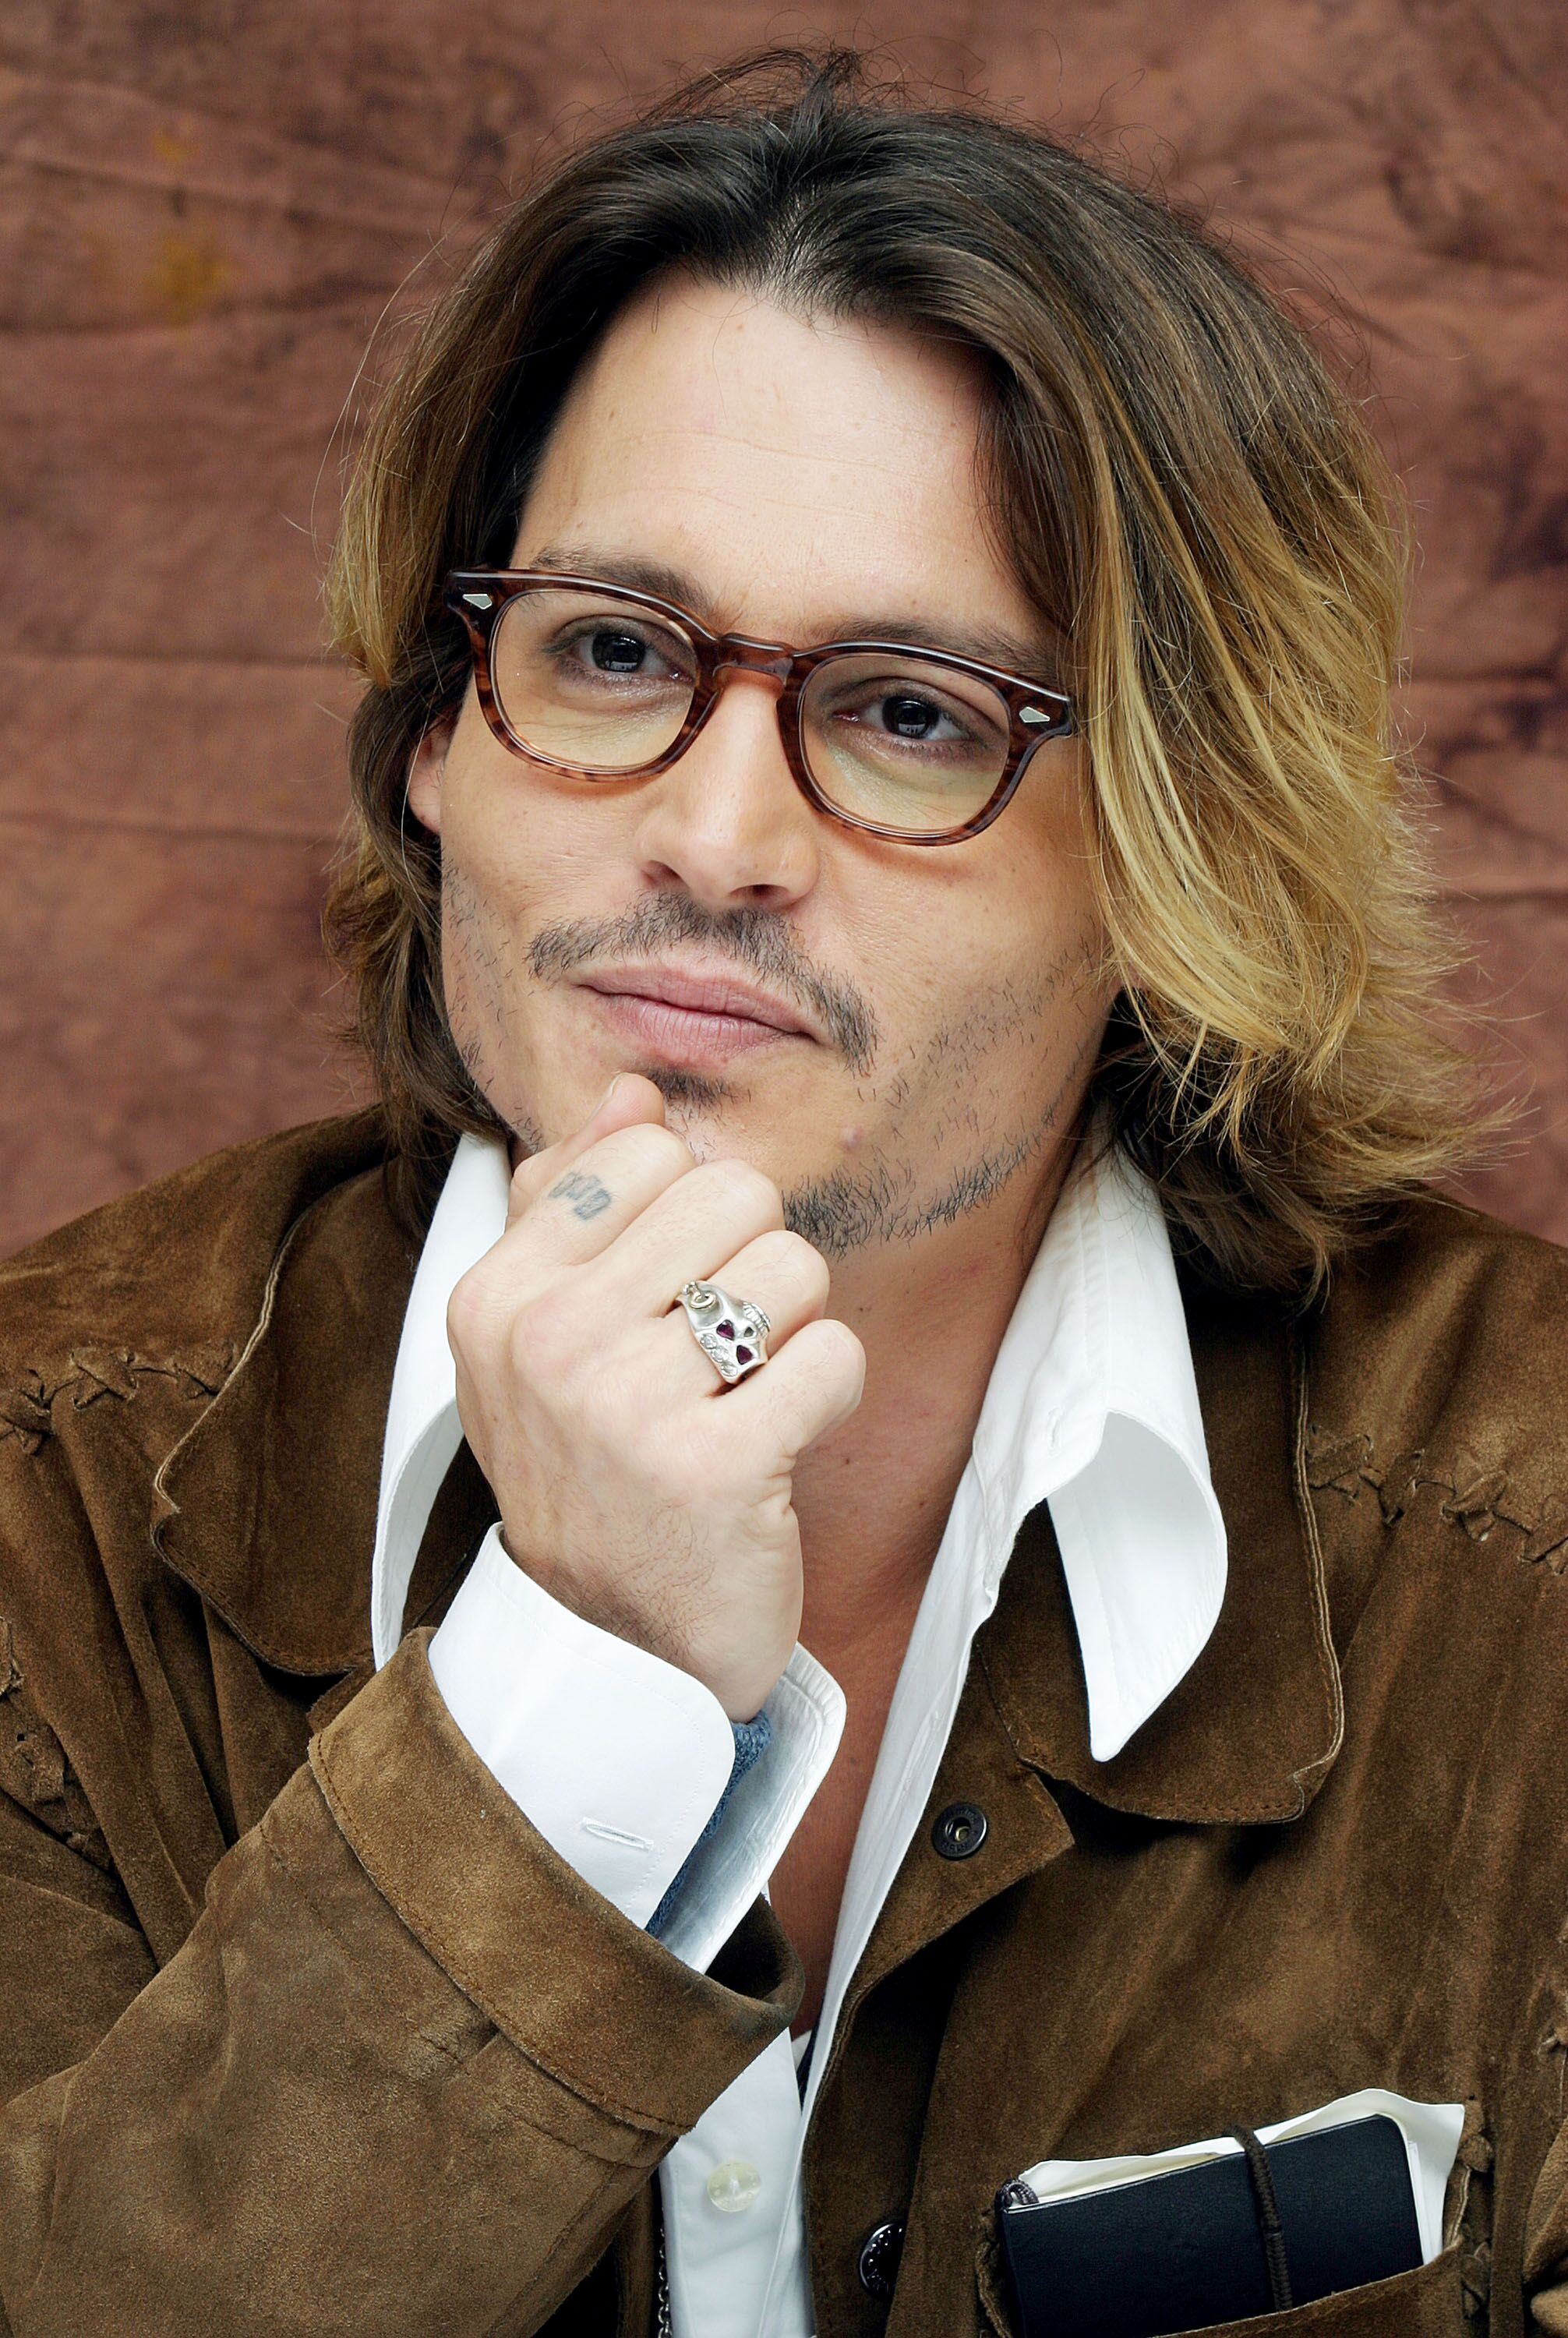 Johnny Depp attends the press conference for his latest film "Once Upon a Time in Mexico." | Source: Getty Images